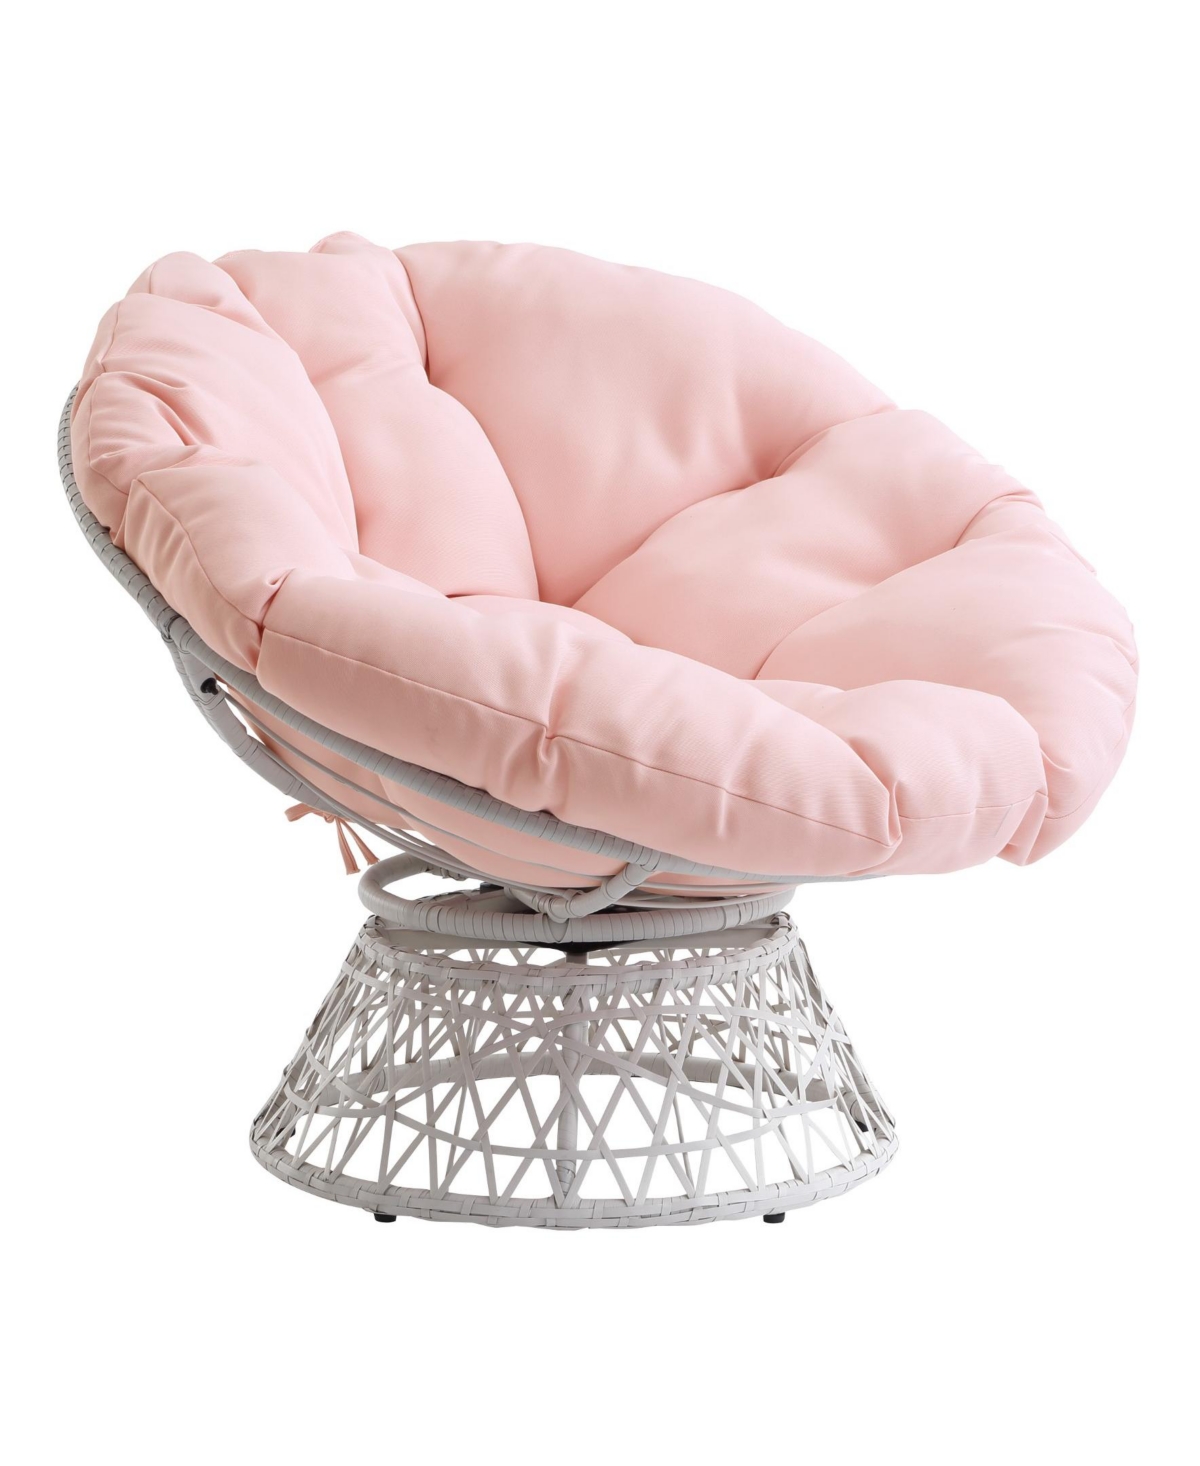 Shop Osp Home Furnishings Papasan Chair With Round Pillow Cushion And Wicker Weave In Pink